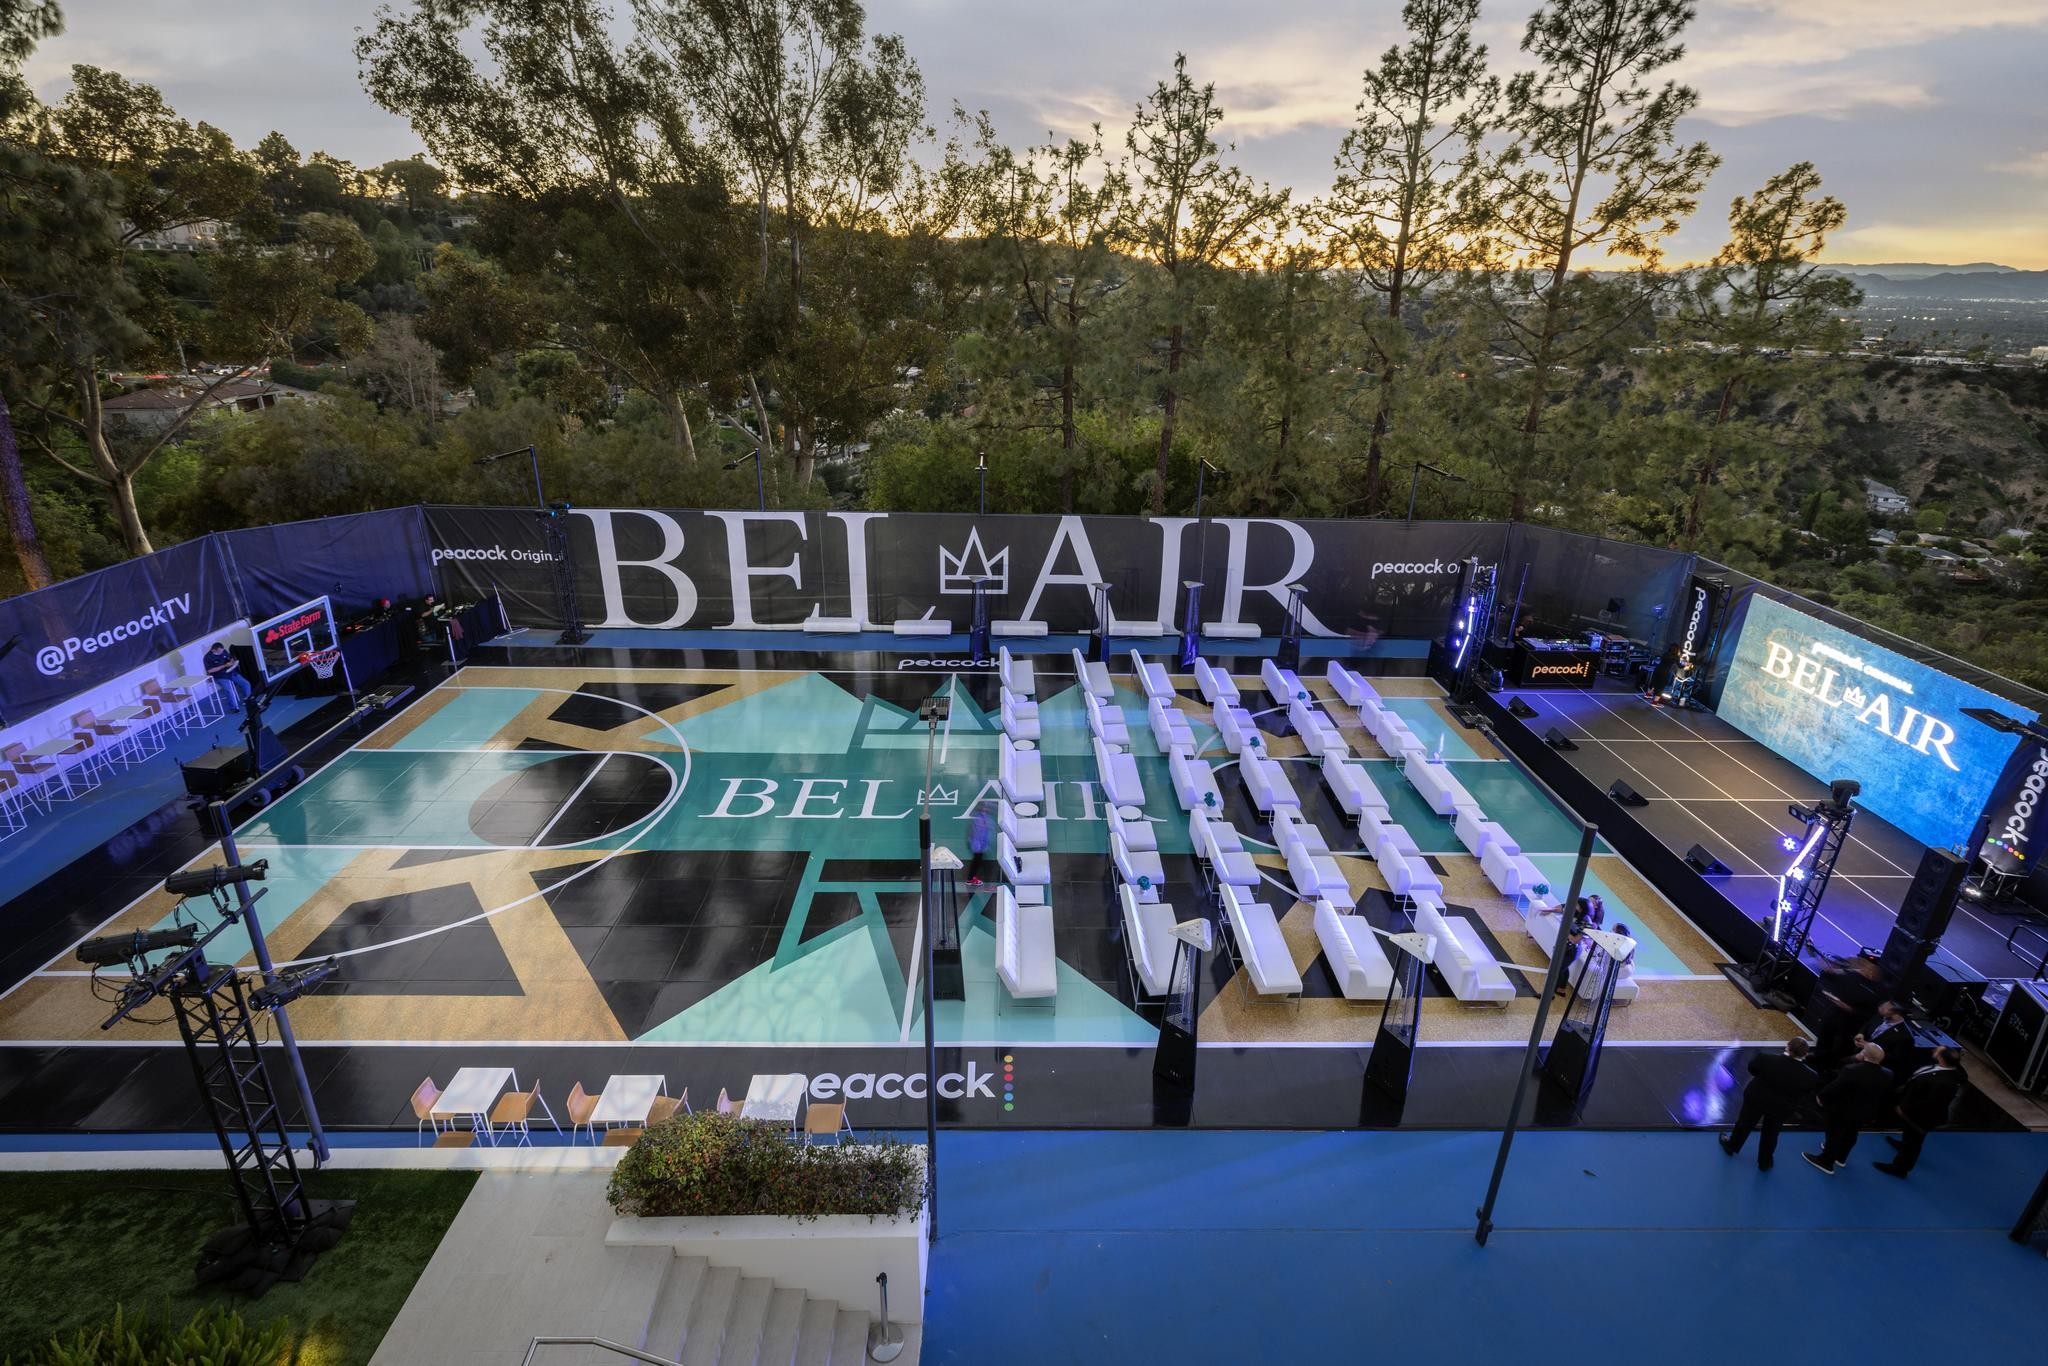 Peacock's Bel-Air (The Mansion Experience)